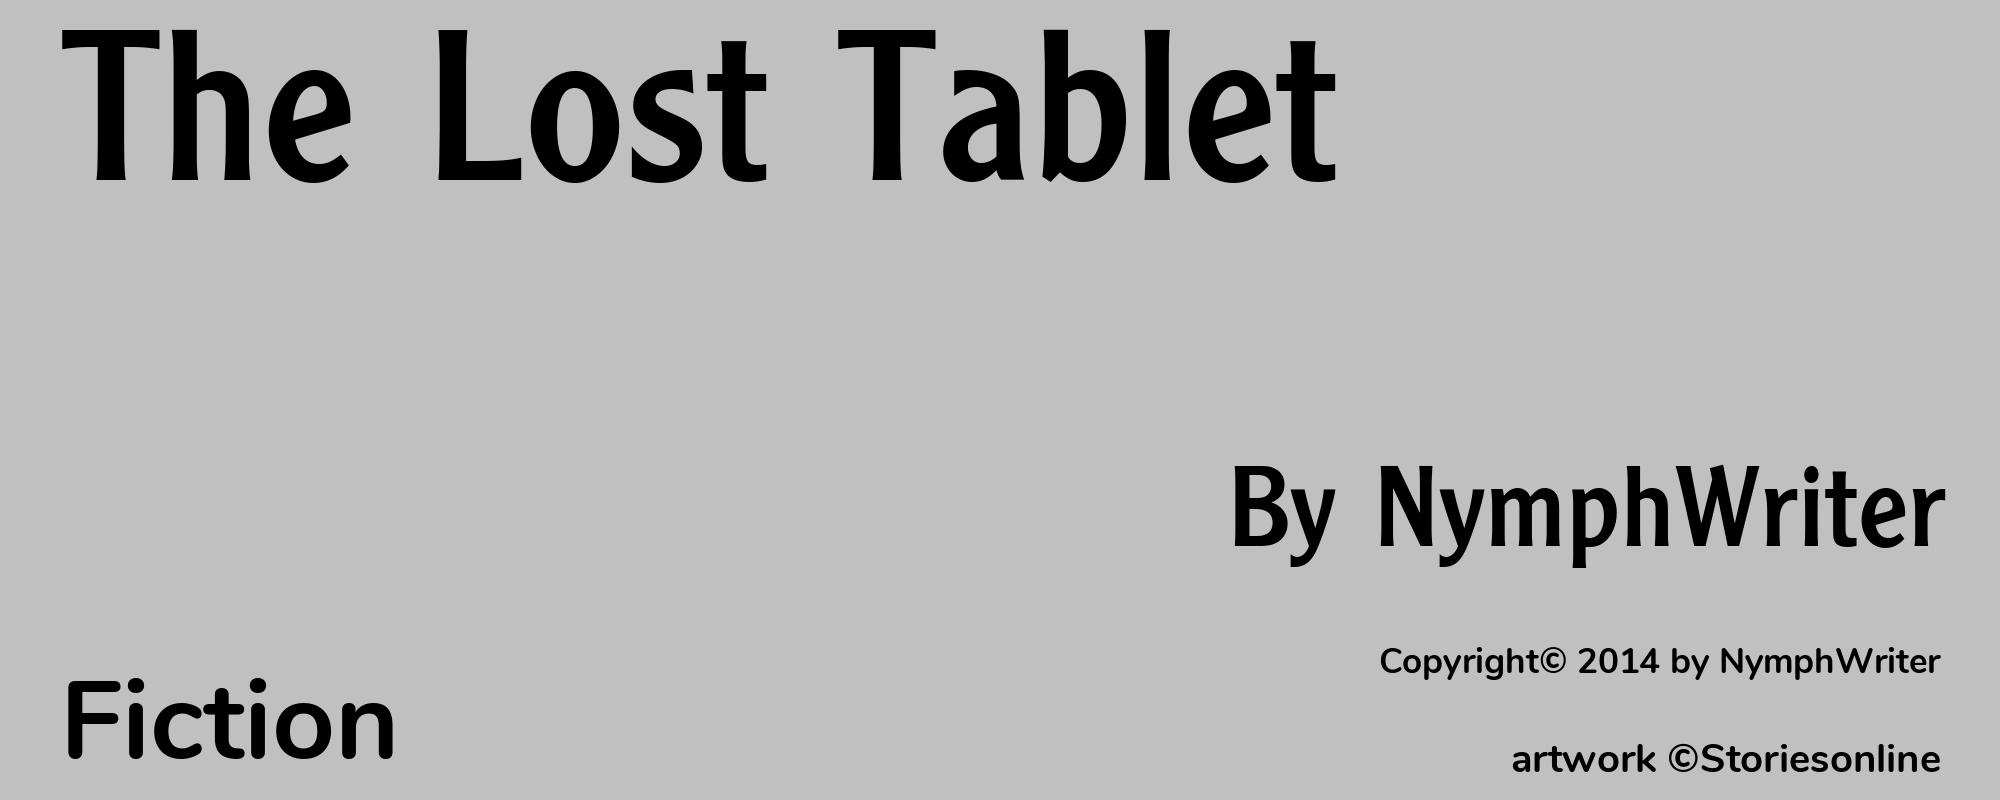 The Lost Tablet - Cover